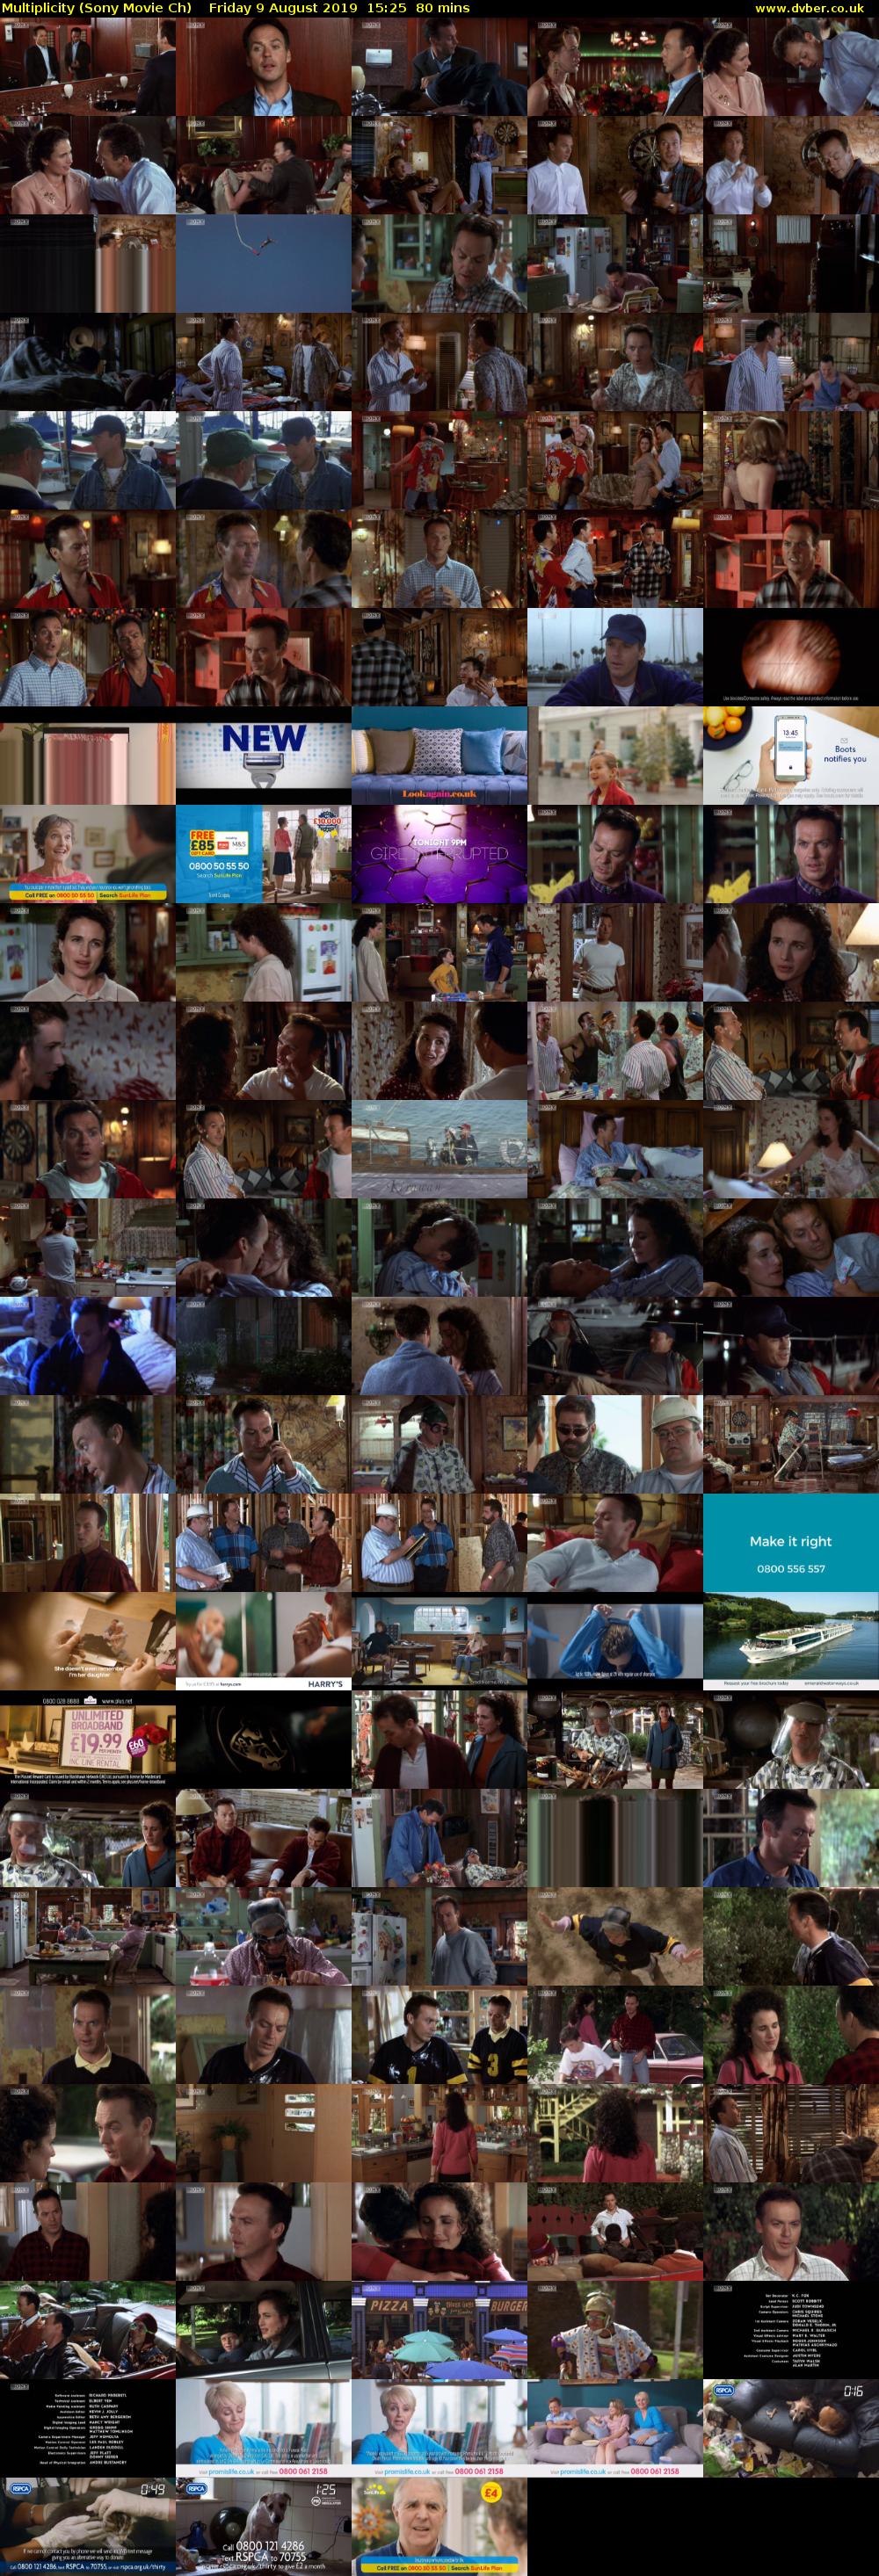 Multiplicity (Sony Movie Ch) Friday 9 August 2019 15:25 - 16:45